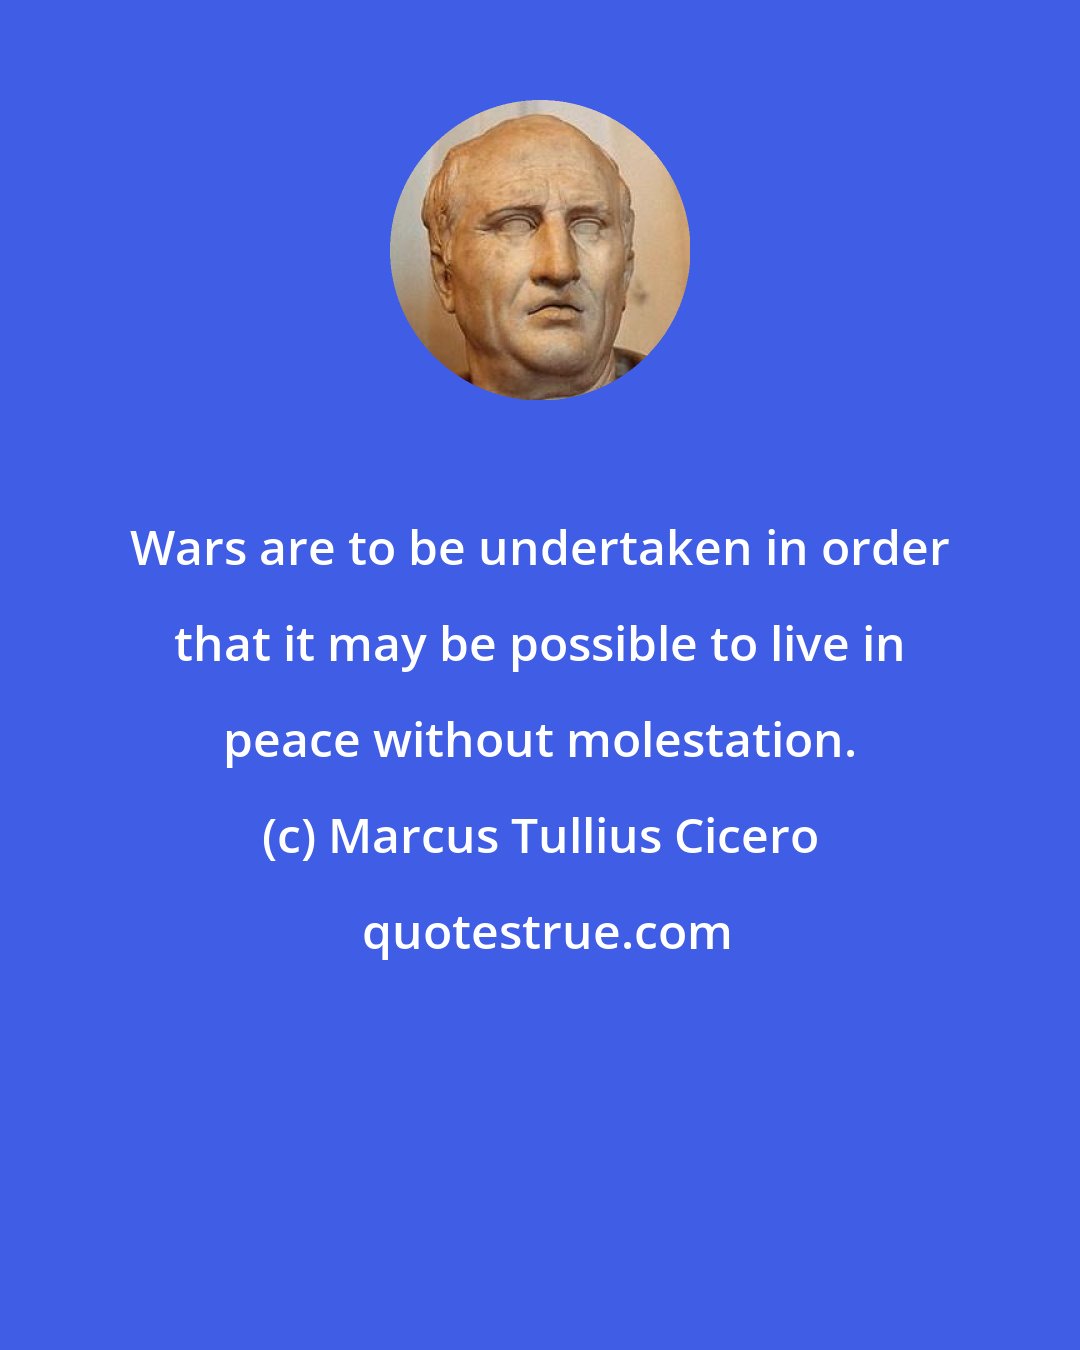 Marcus Tullius Cicero: Wars are to be undertaken in order that it may be possible to live in peace without molestation.